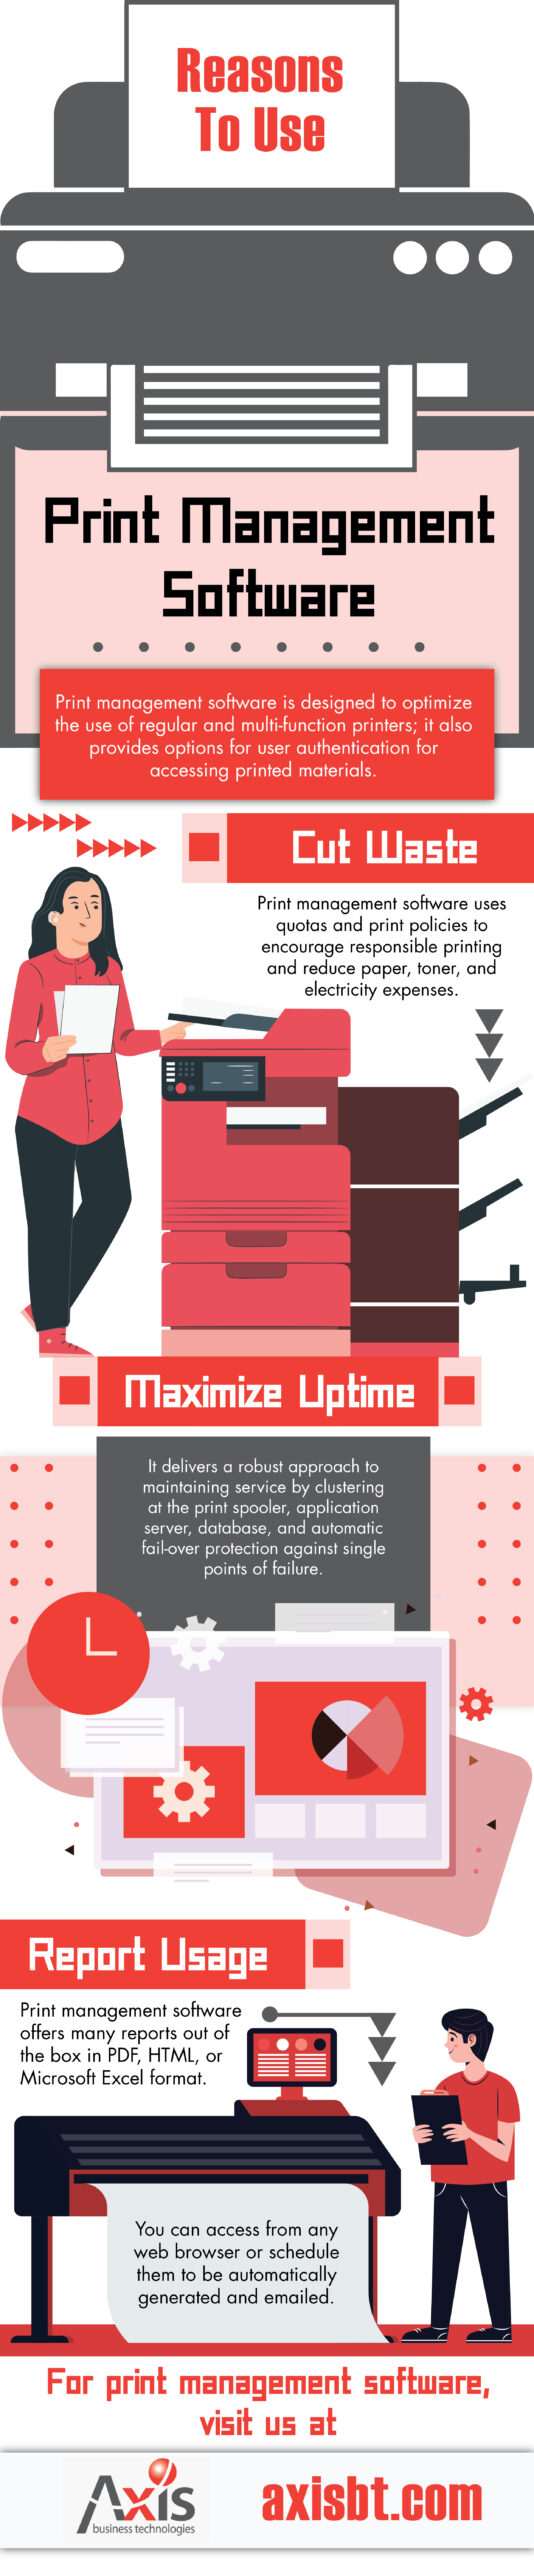 Reasons to Use Print Management Software - Infograph